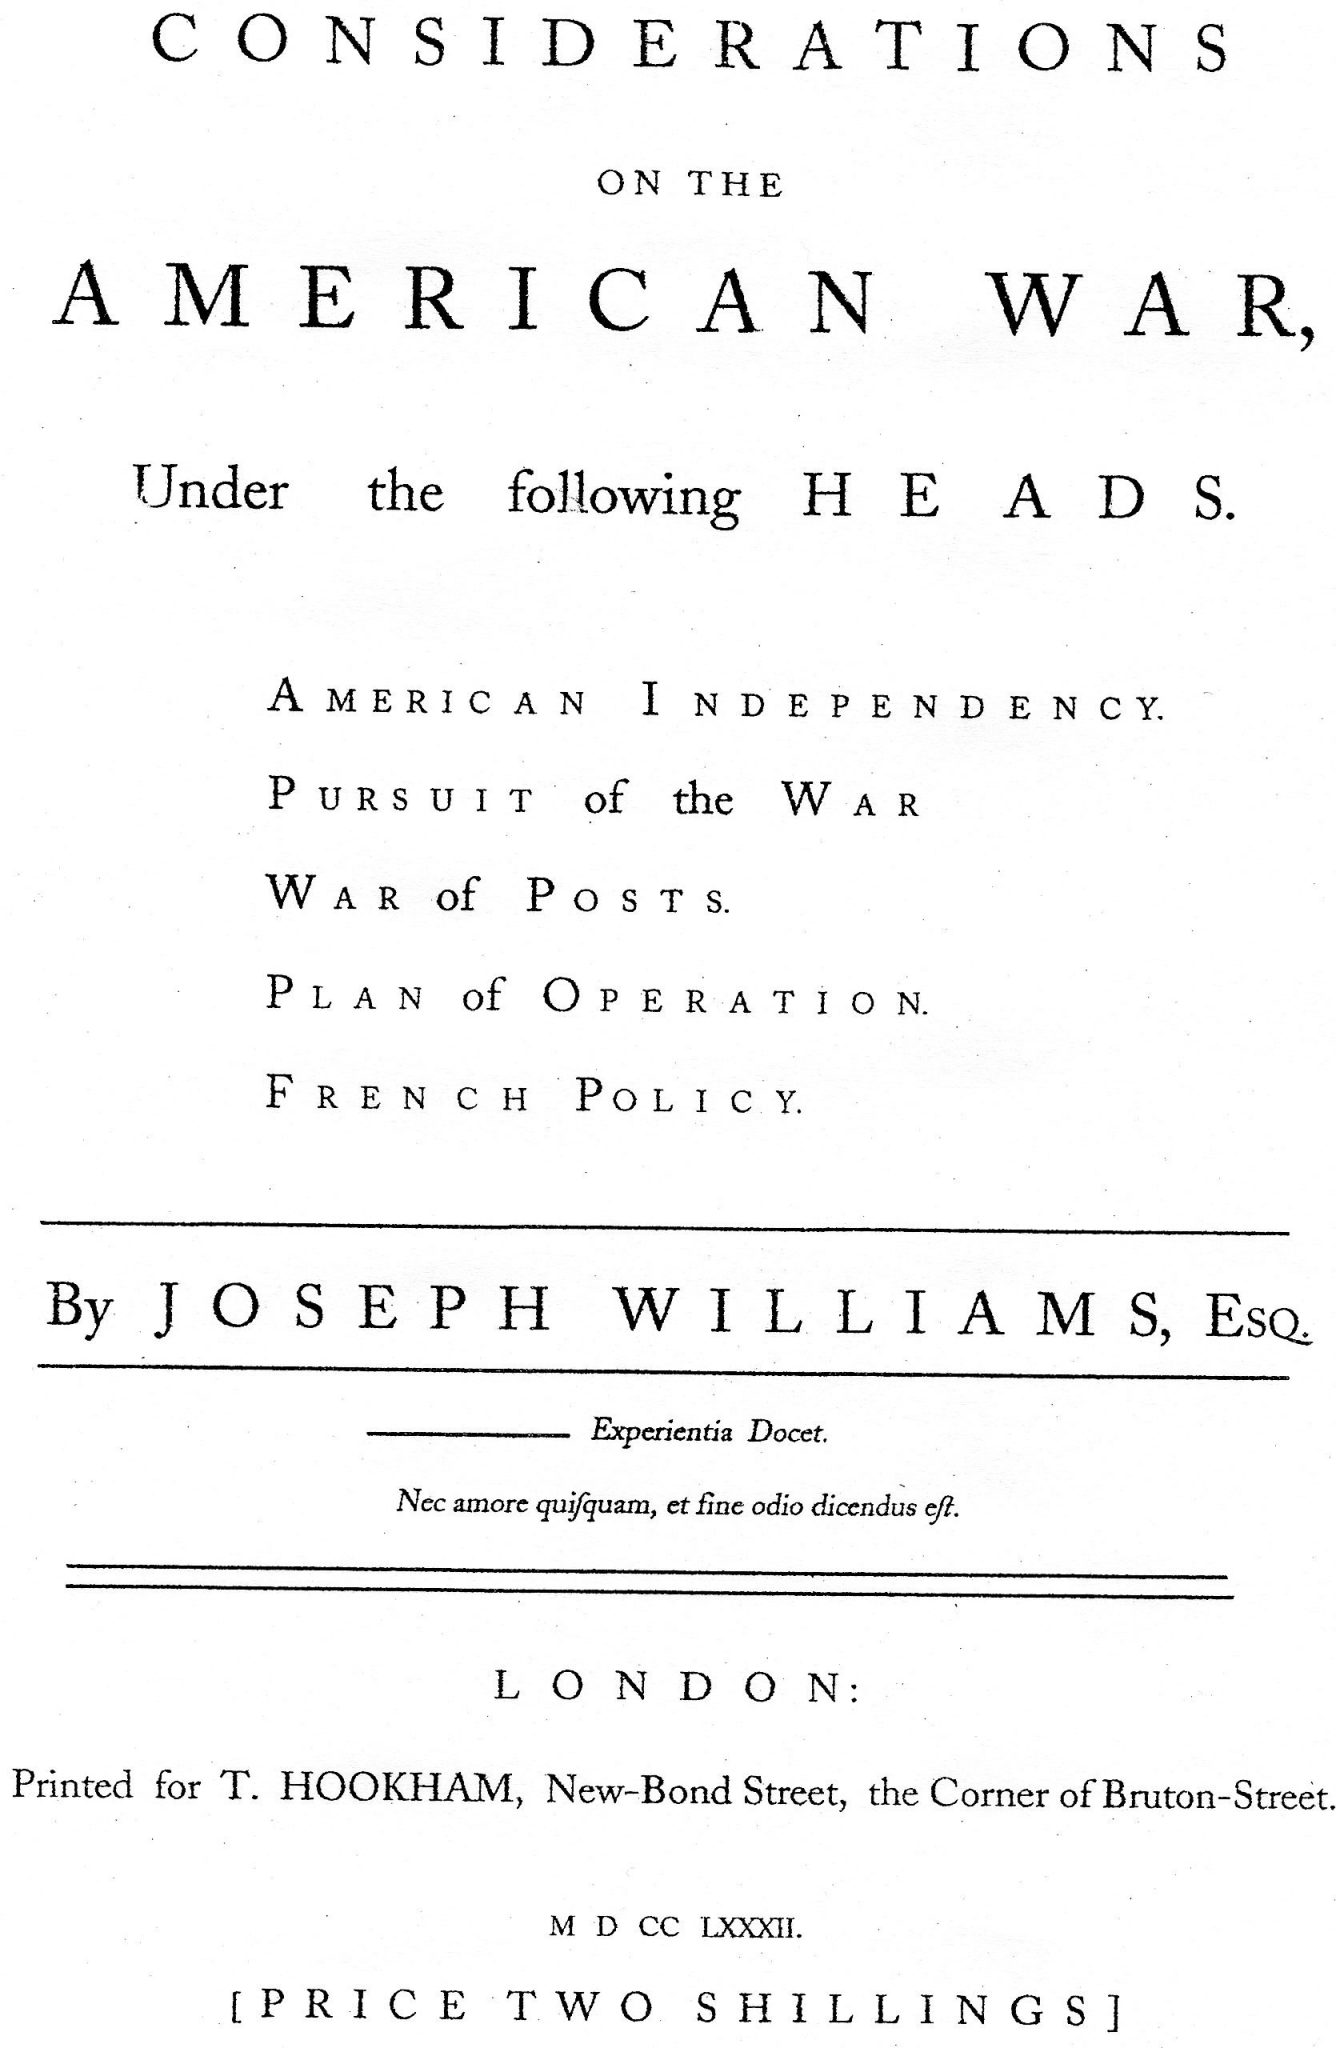 Considerations on the American War, by Joseph Williams, London, 1782